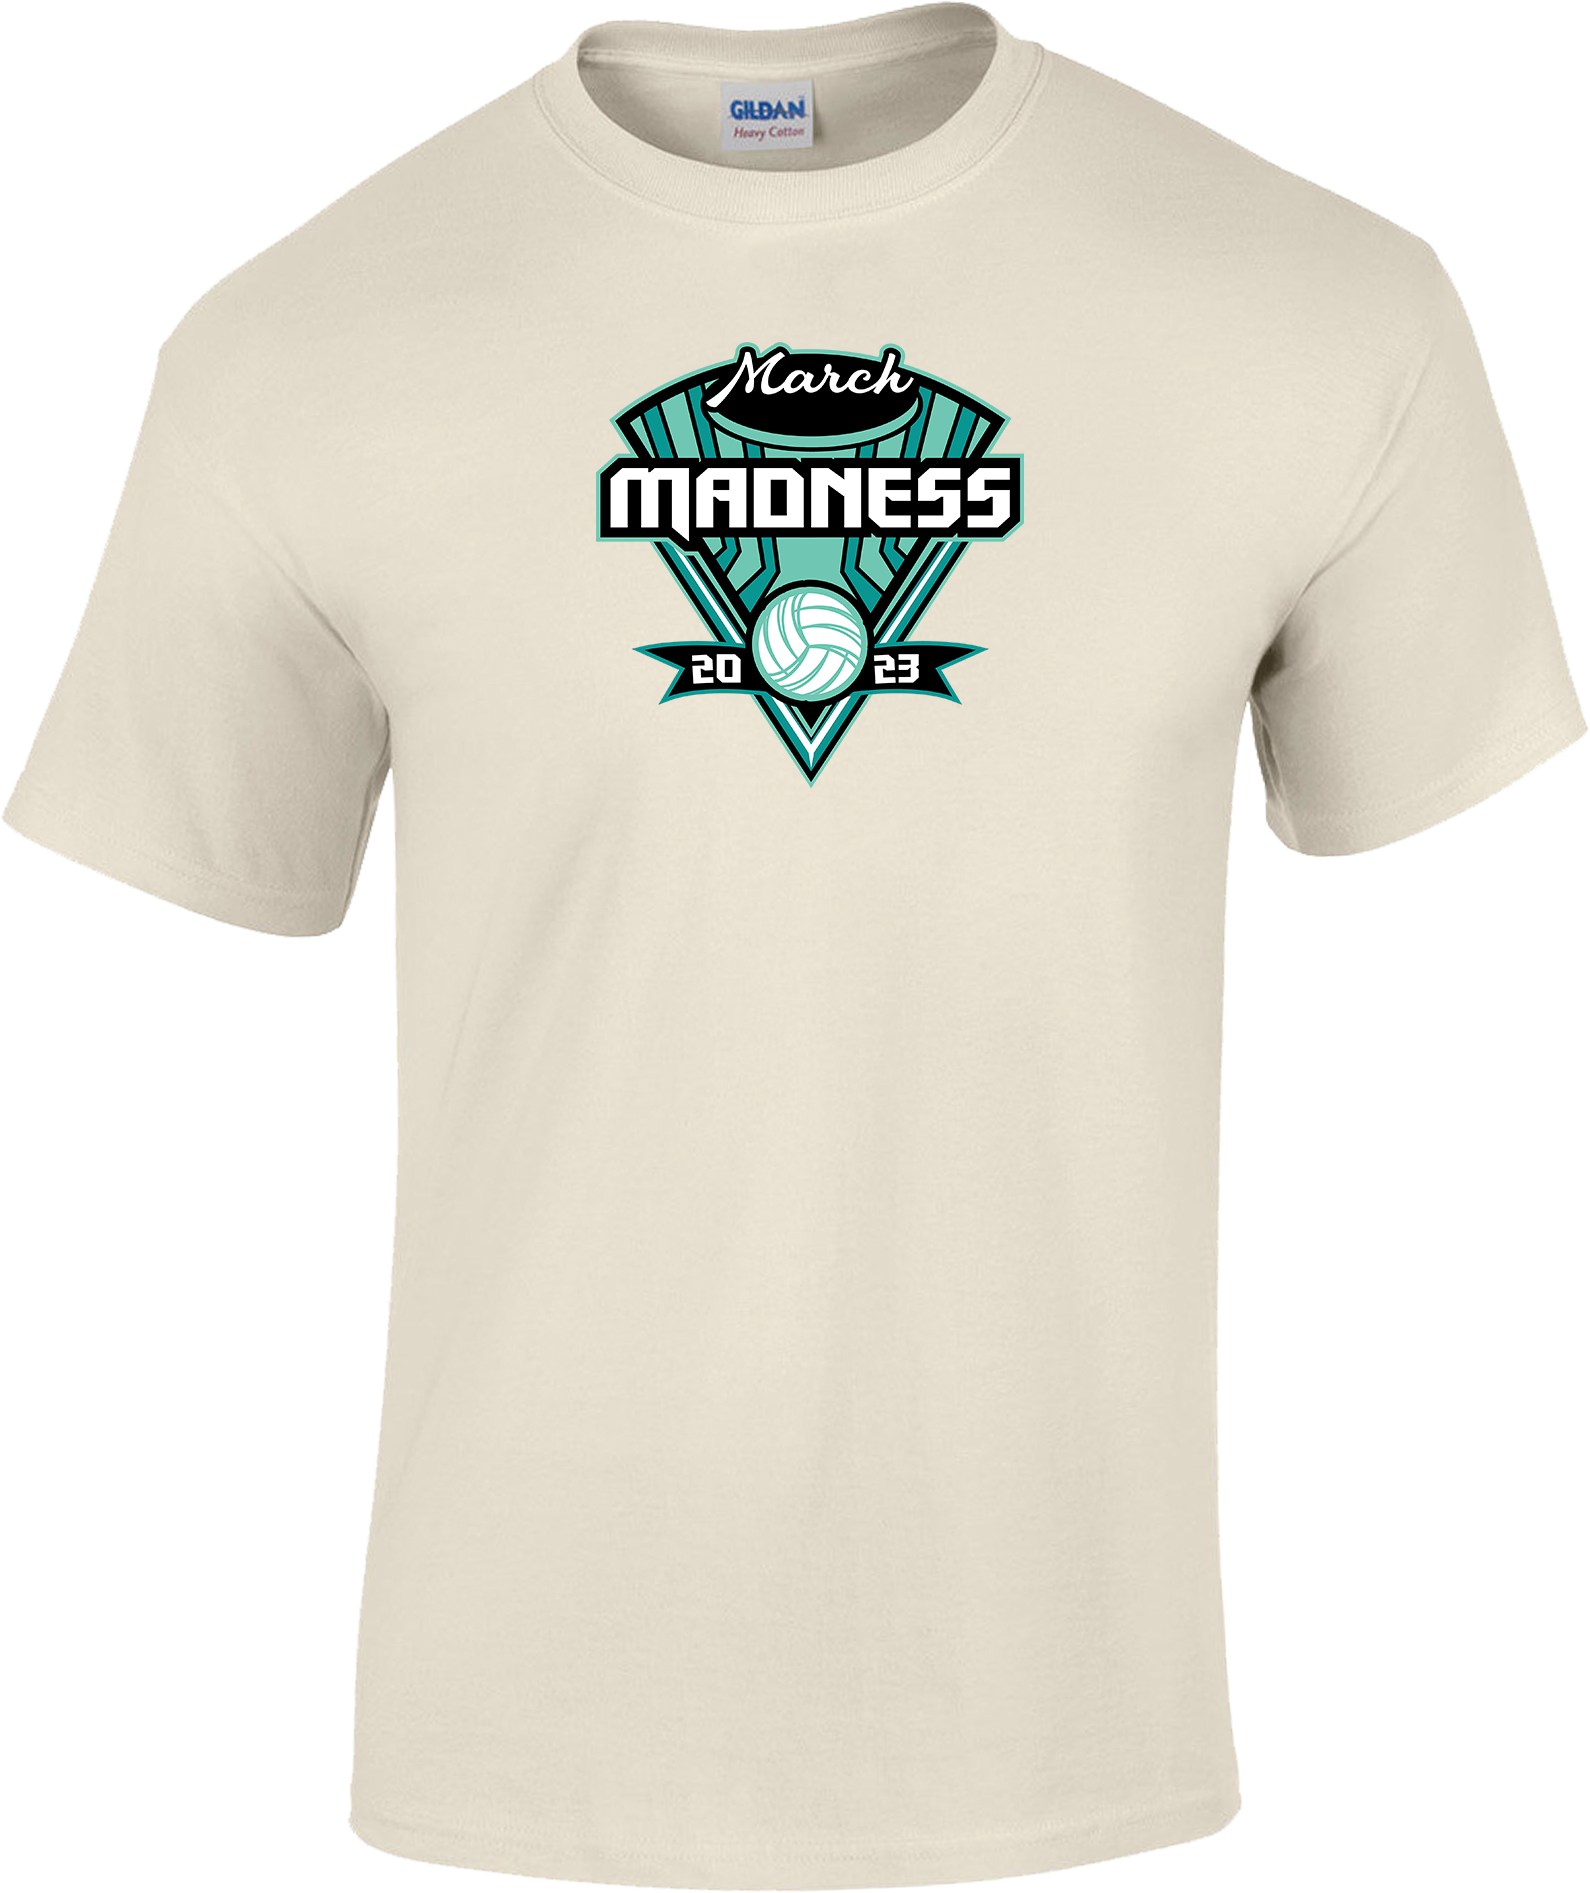 SHORT SLEEVES - 2023 March Madness